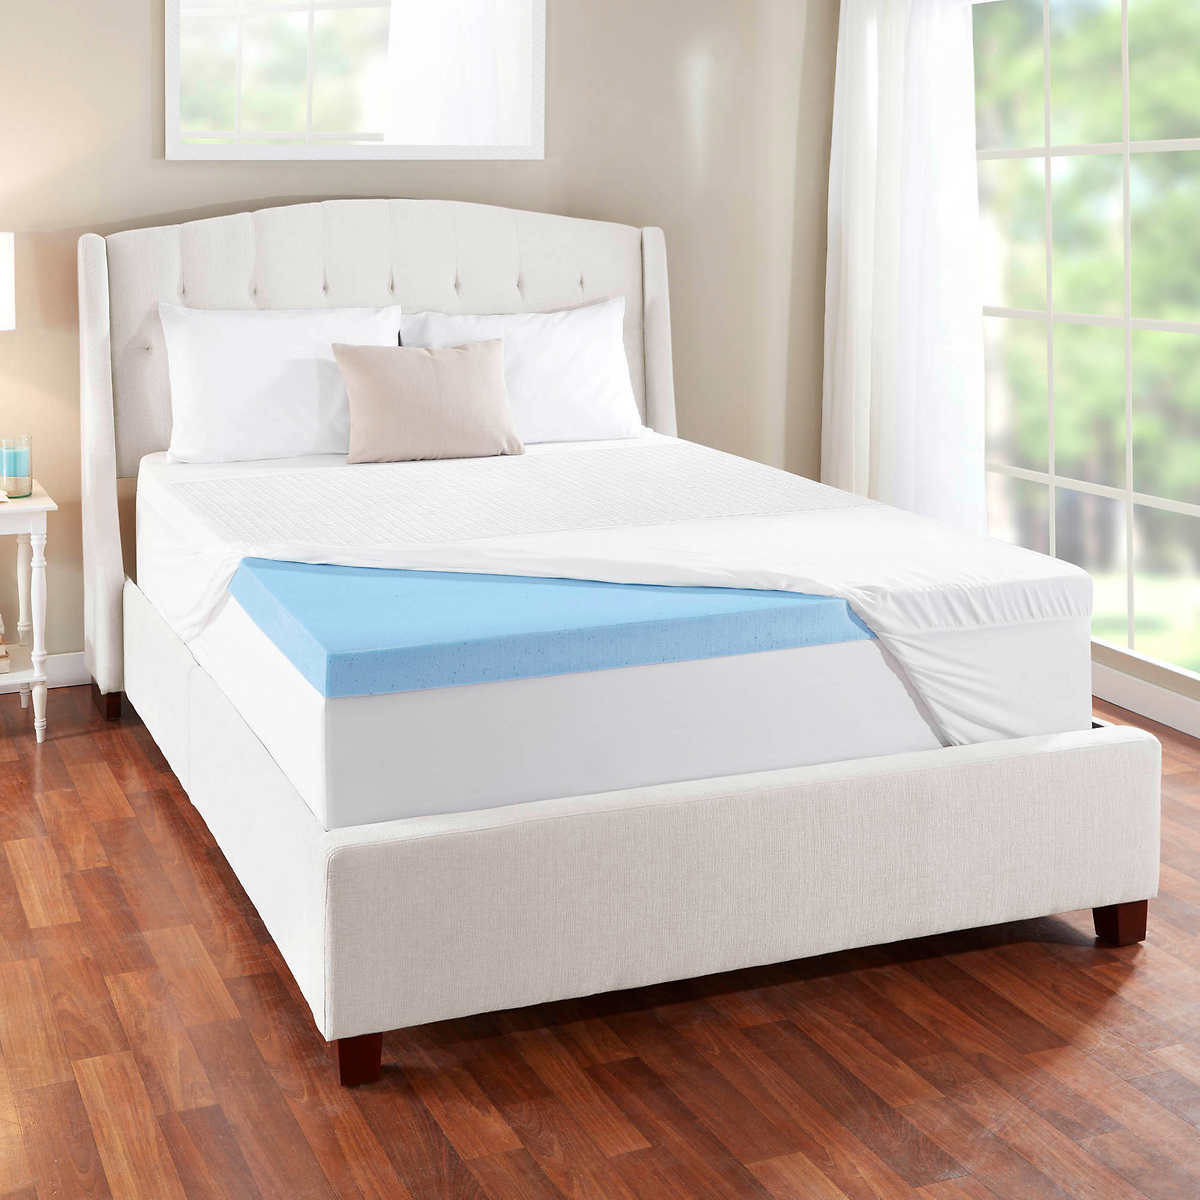 mattress waterproof cover bed bath and beyond